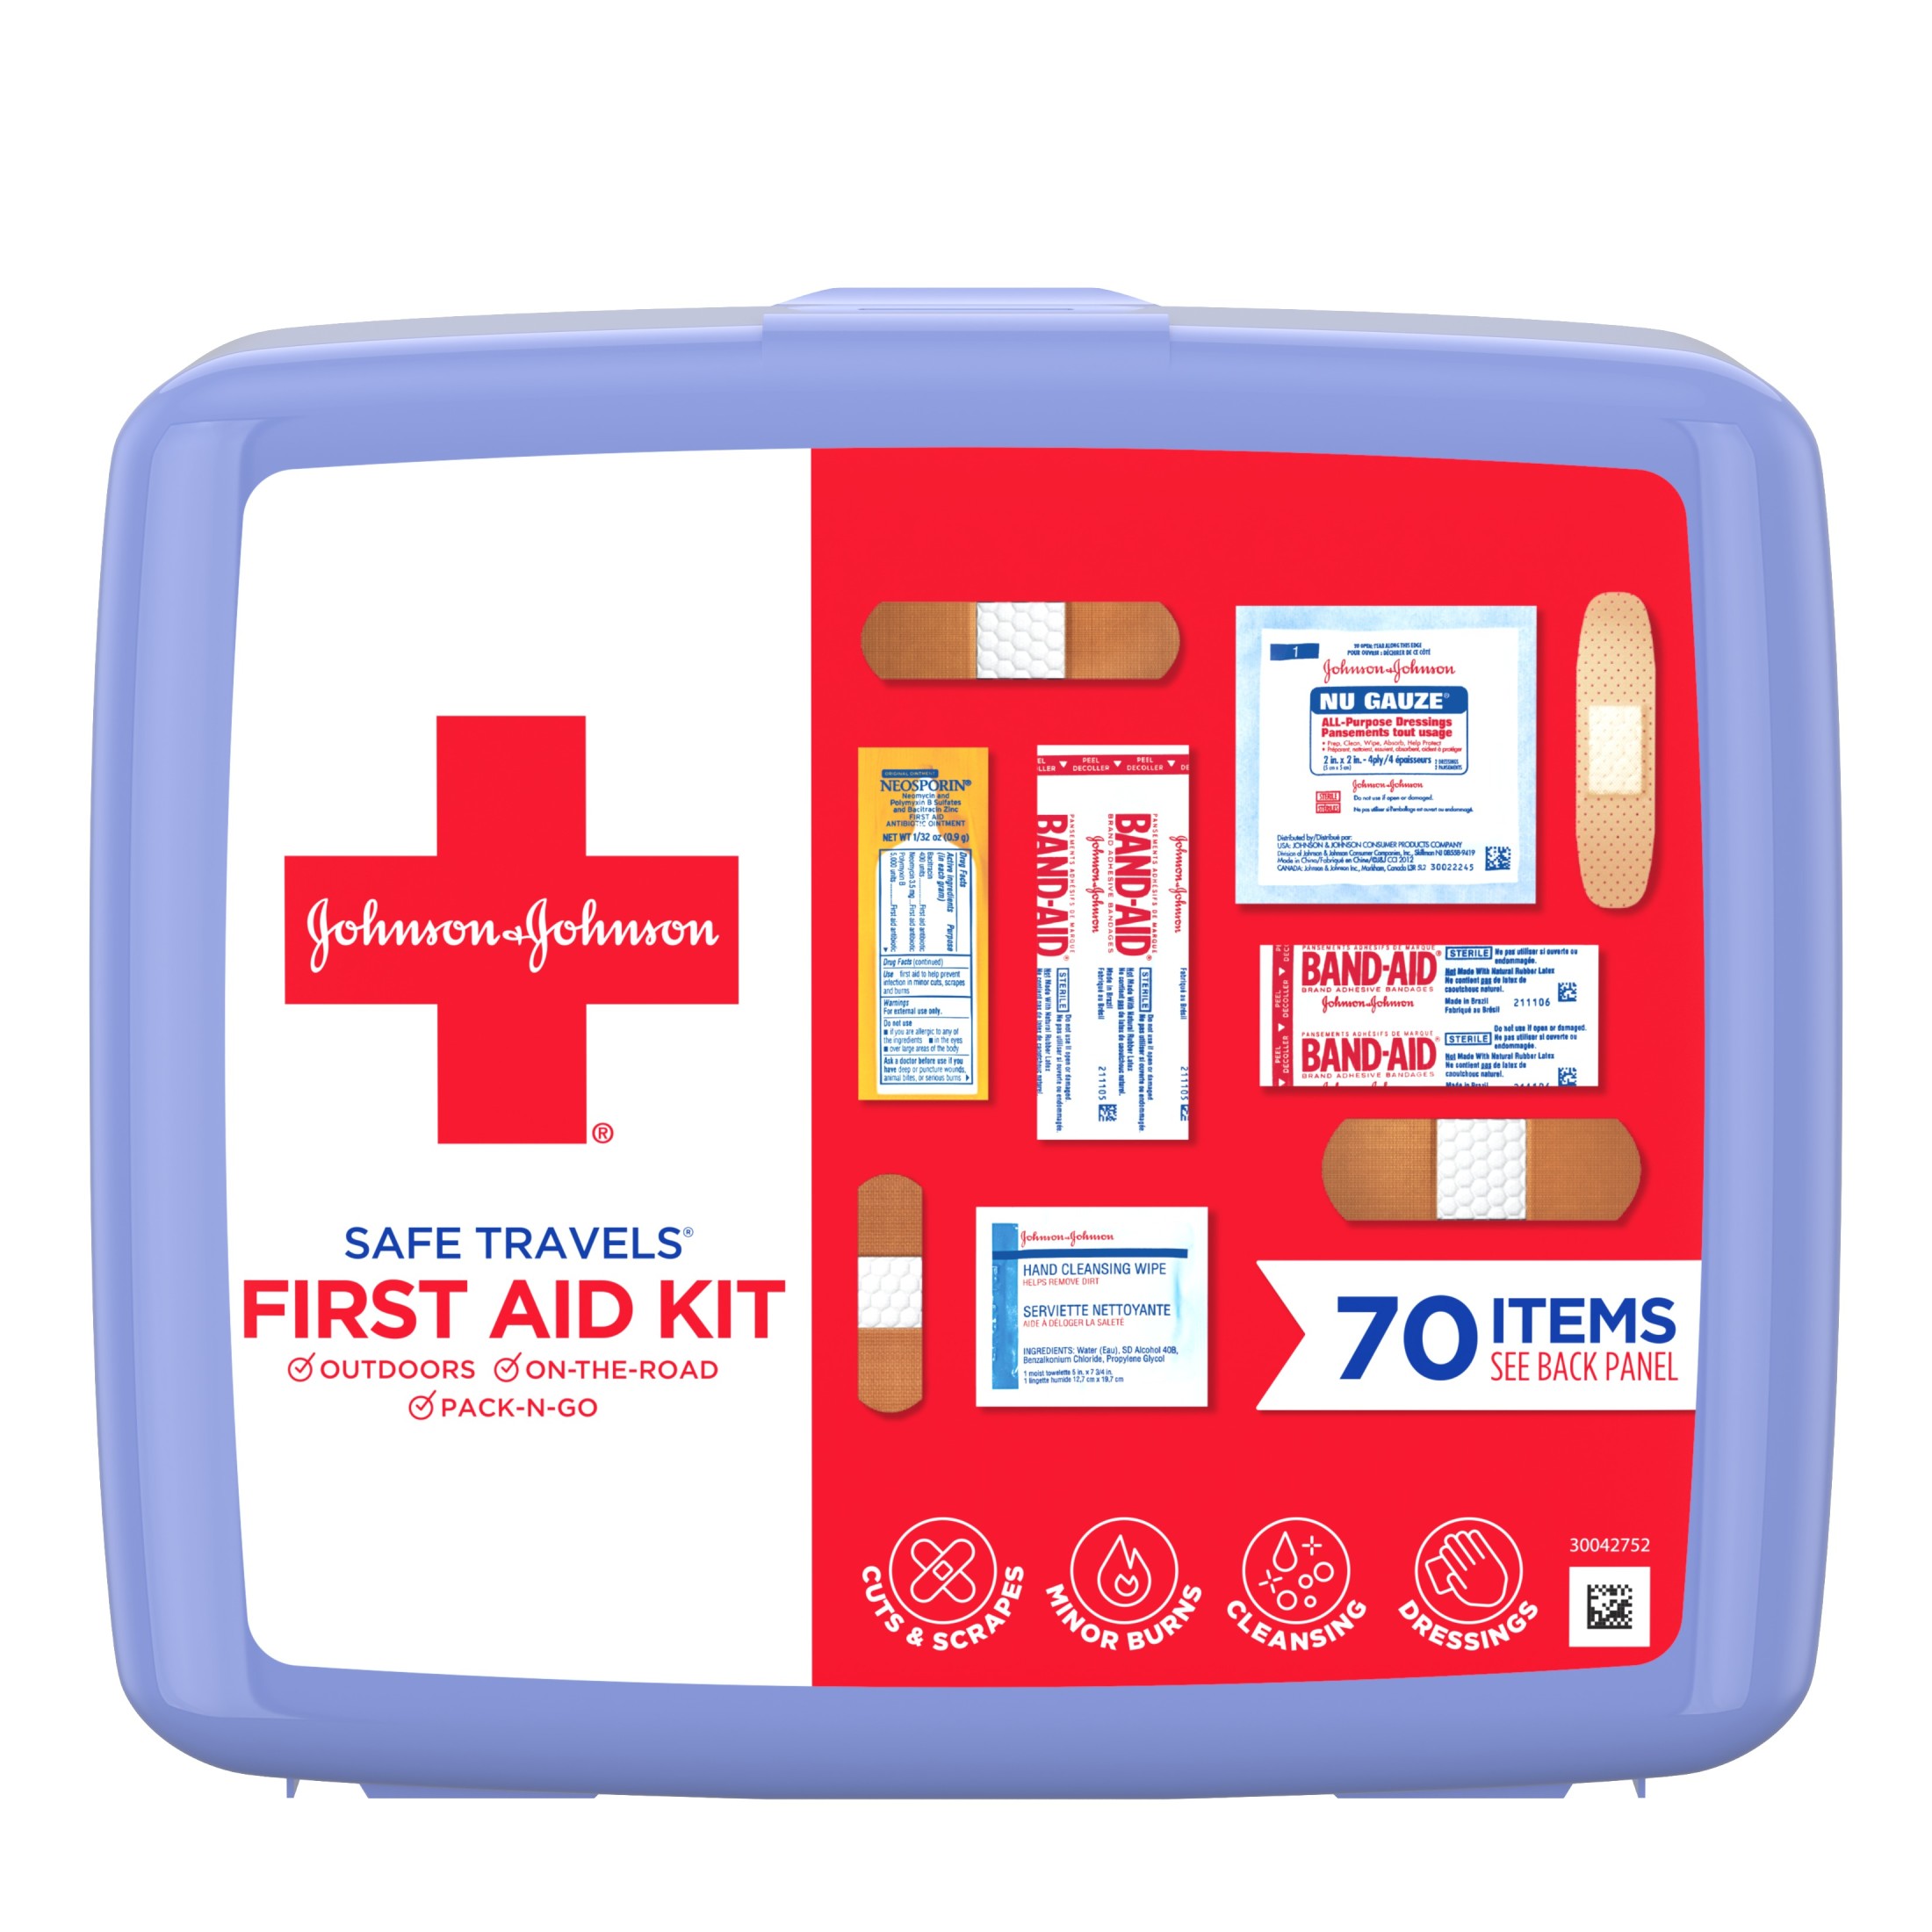 Johnson & Johnson Safe Travels Portable Emergency First Aid Kit, 70 pc - image 1 of 11